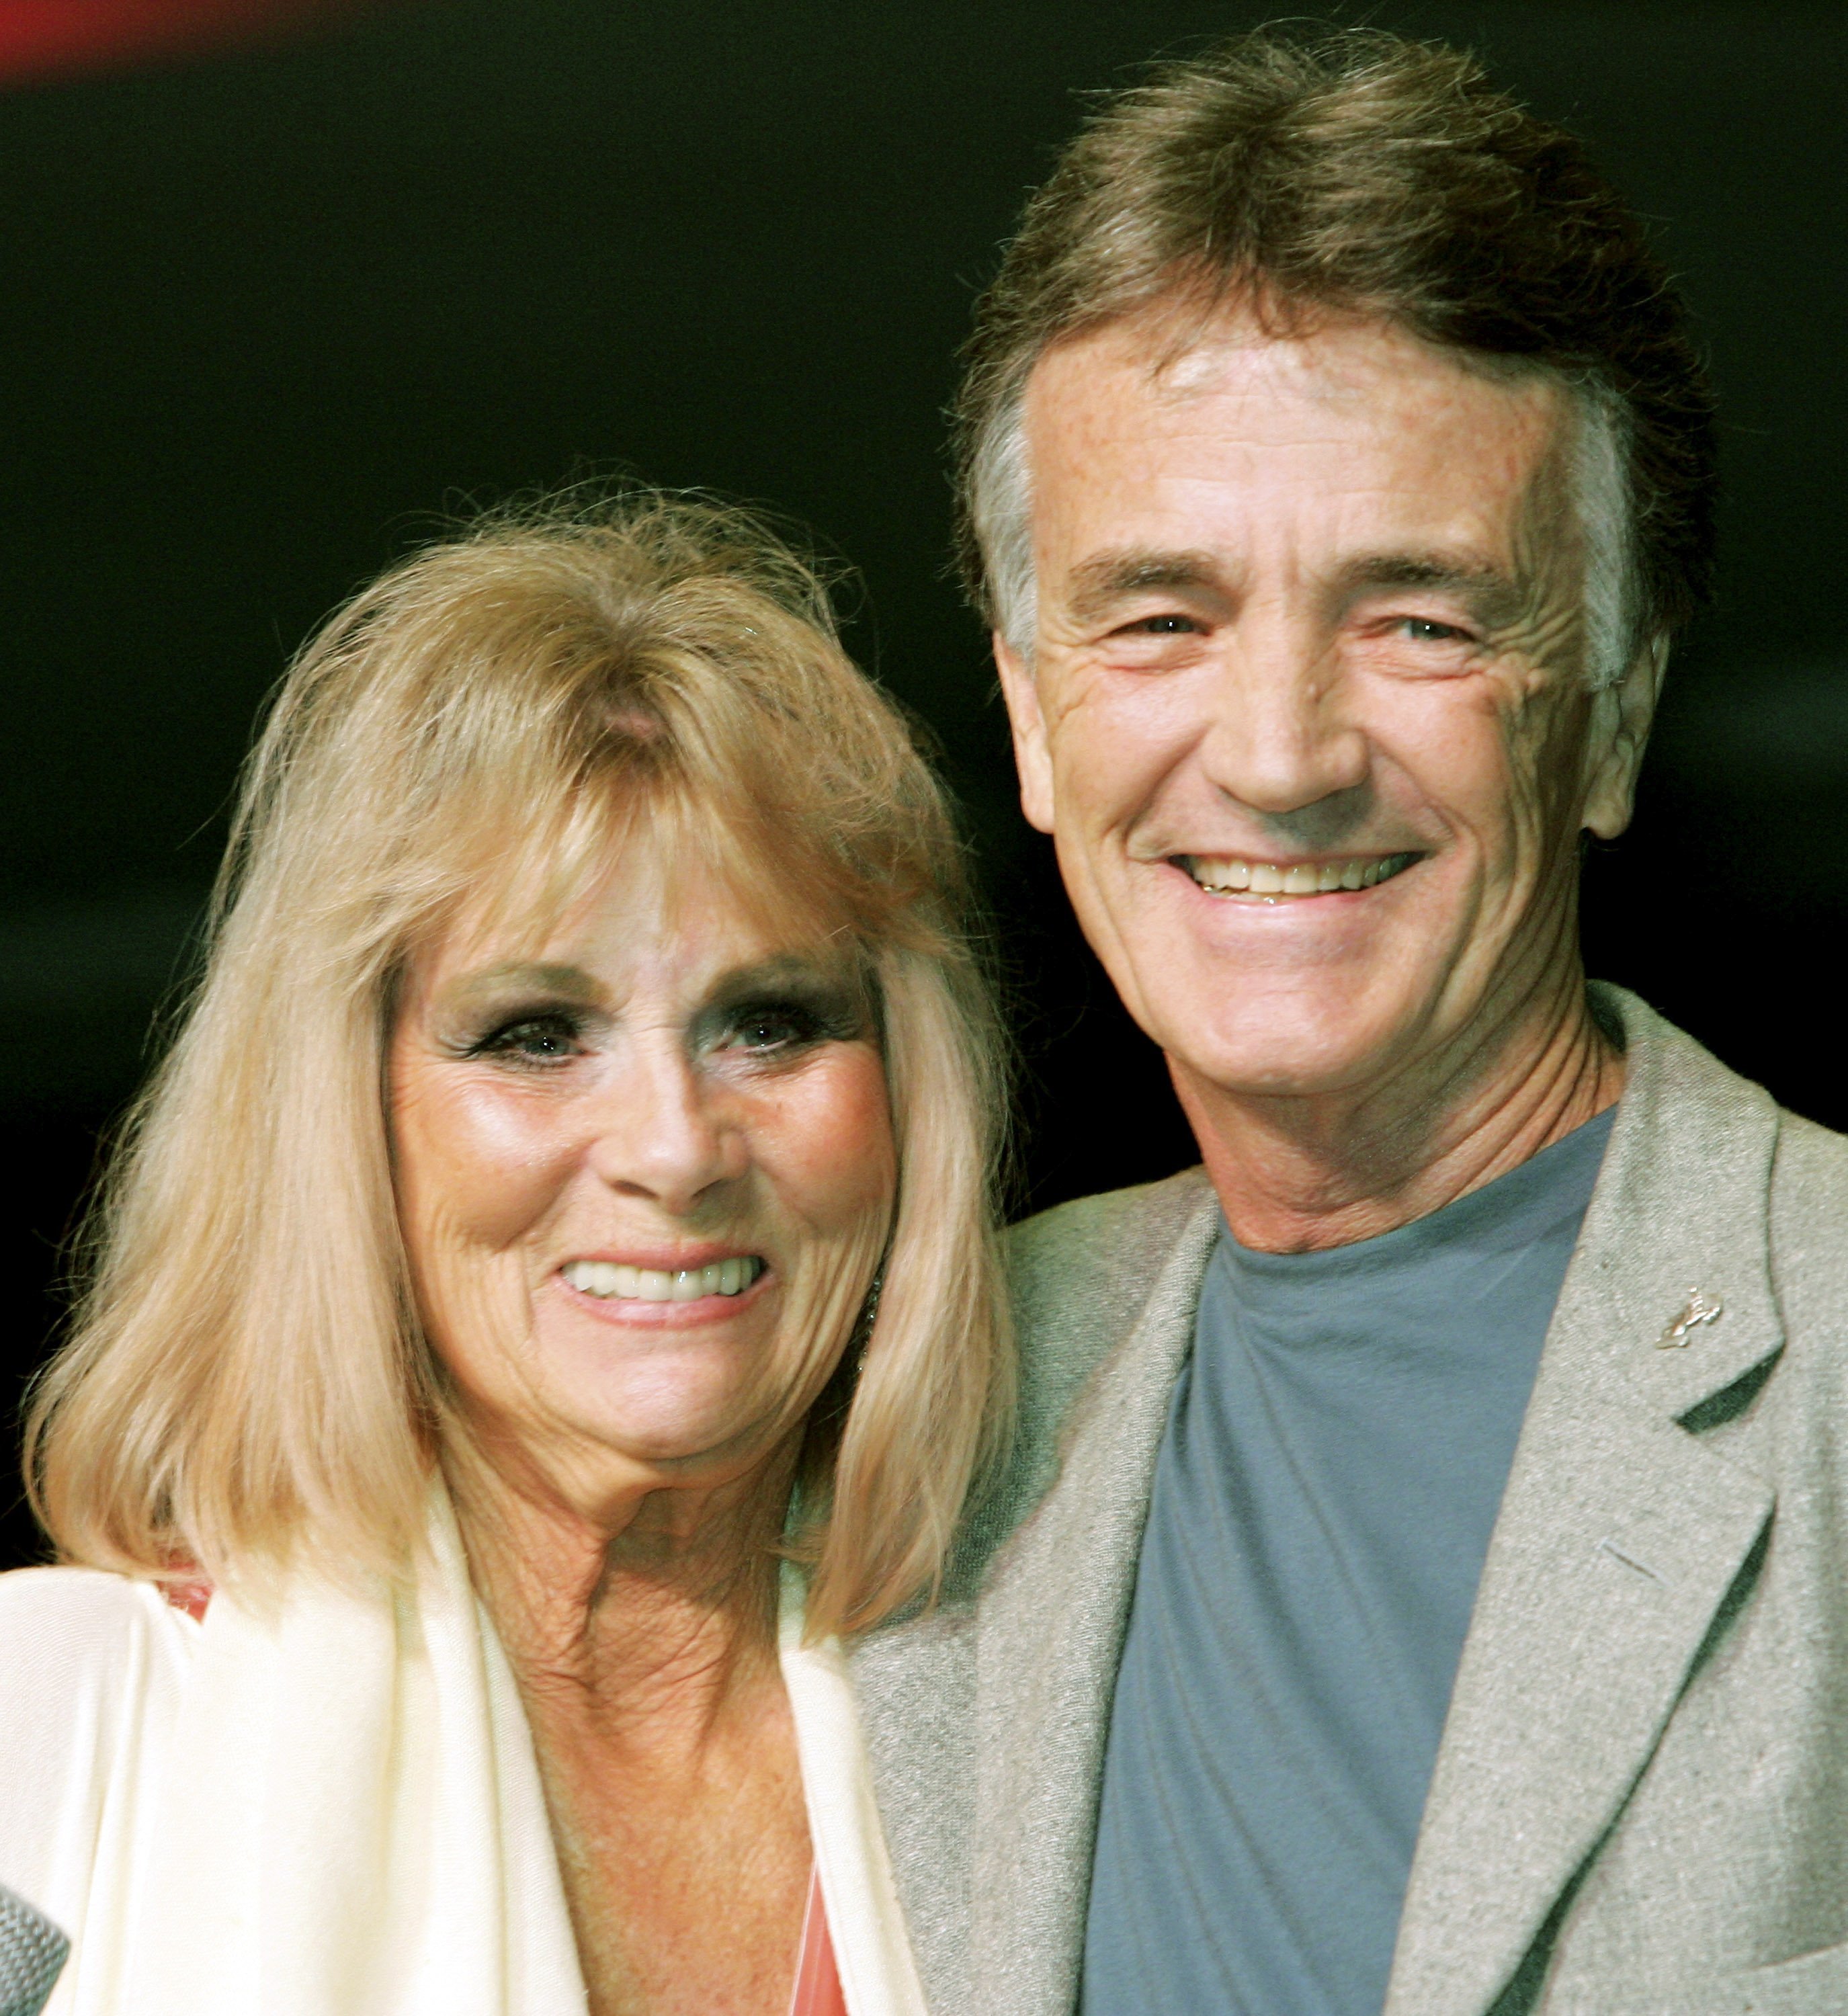 Grace Lee Whitney, who played Janice Rand in the original "Star Trek" television series and films, and actor Robert Walker Jr, who played the character Charlie Evans pose at the Star Trek convention at the Las Vegas Hilton August 11, 2005, in Las Vegas, Nevada | Photo: Ethan Miller/Getty Images